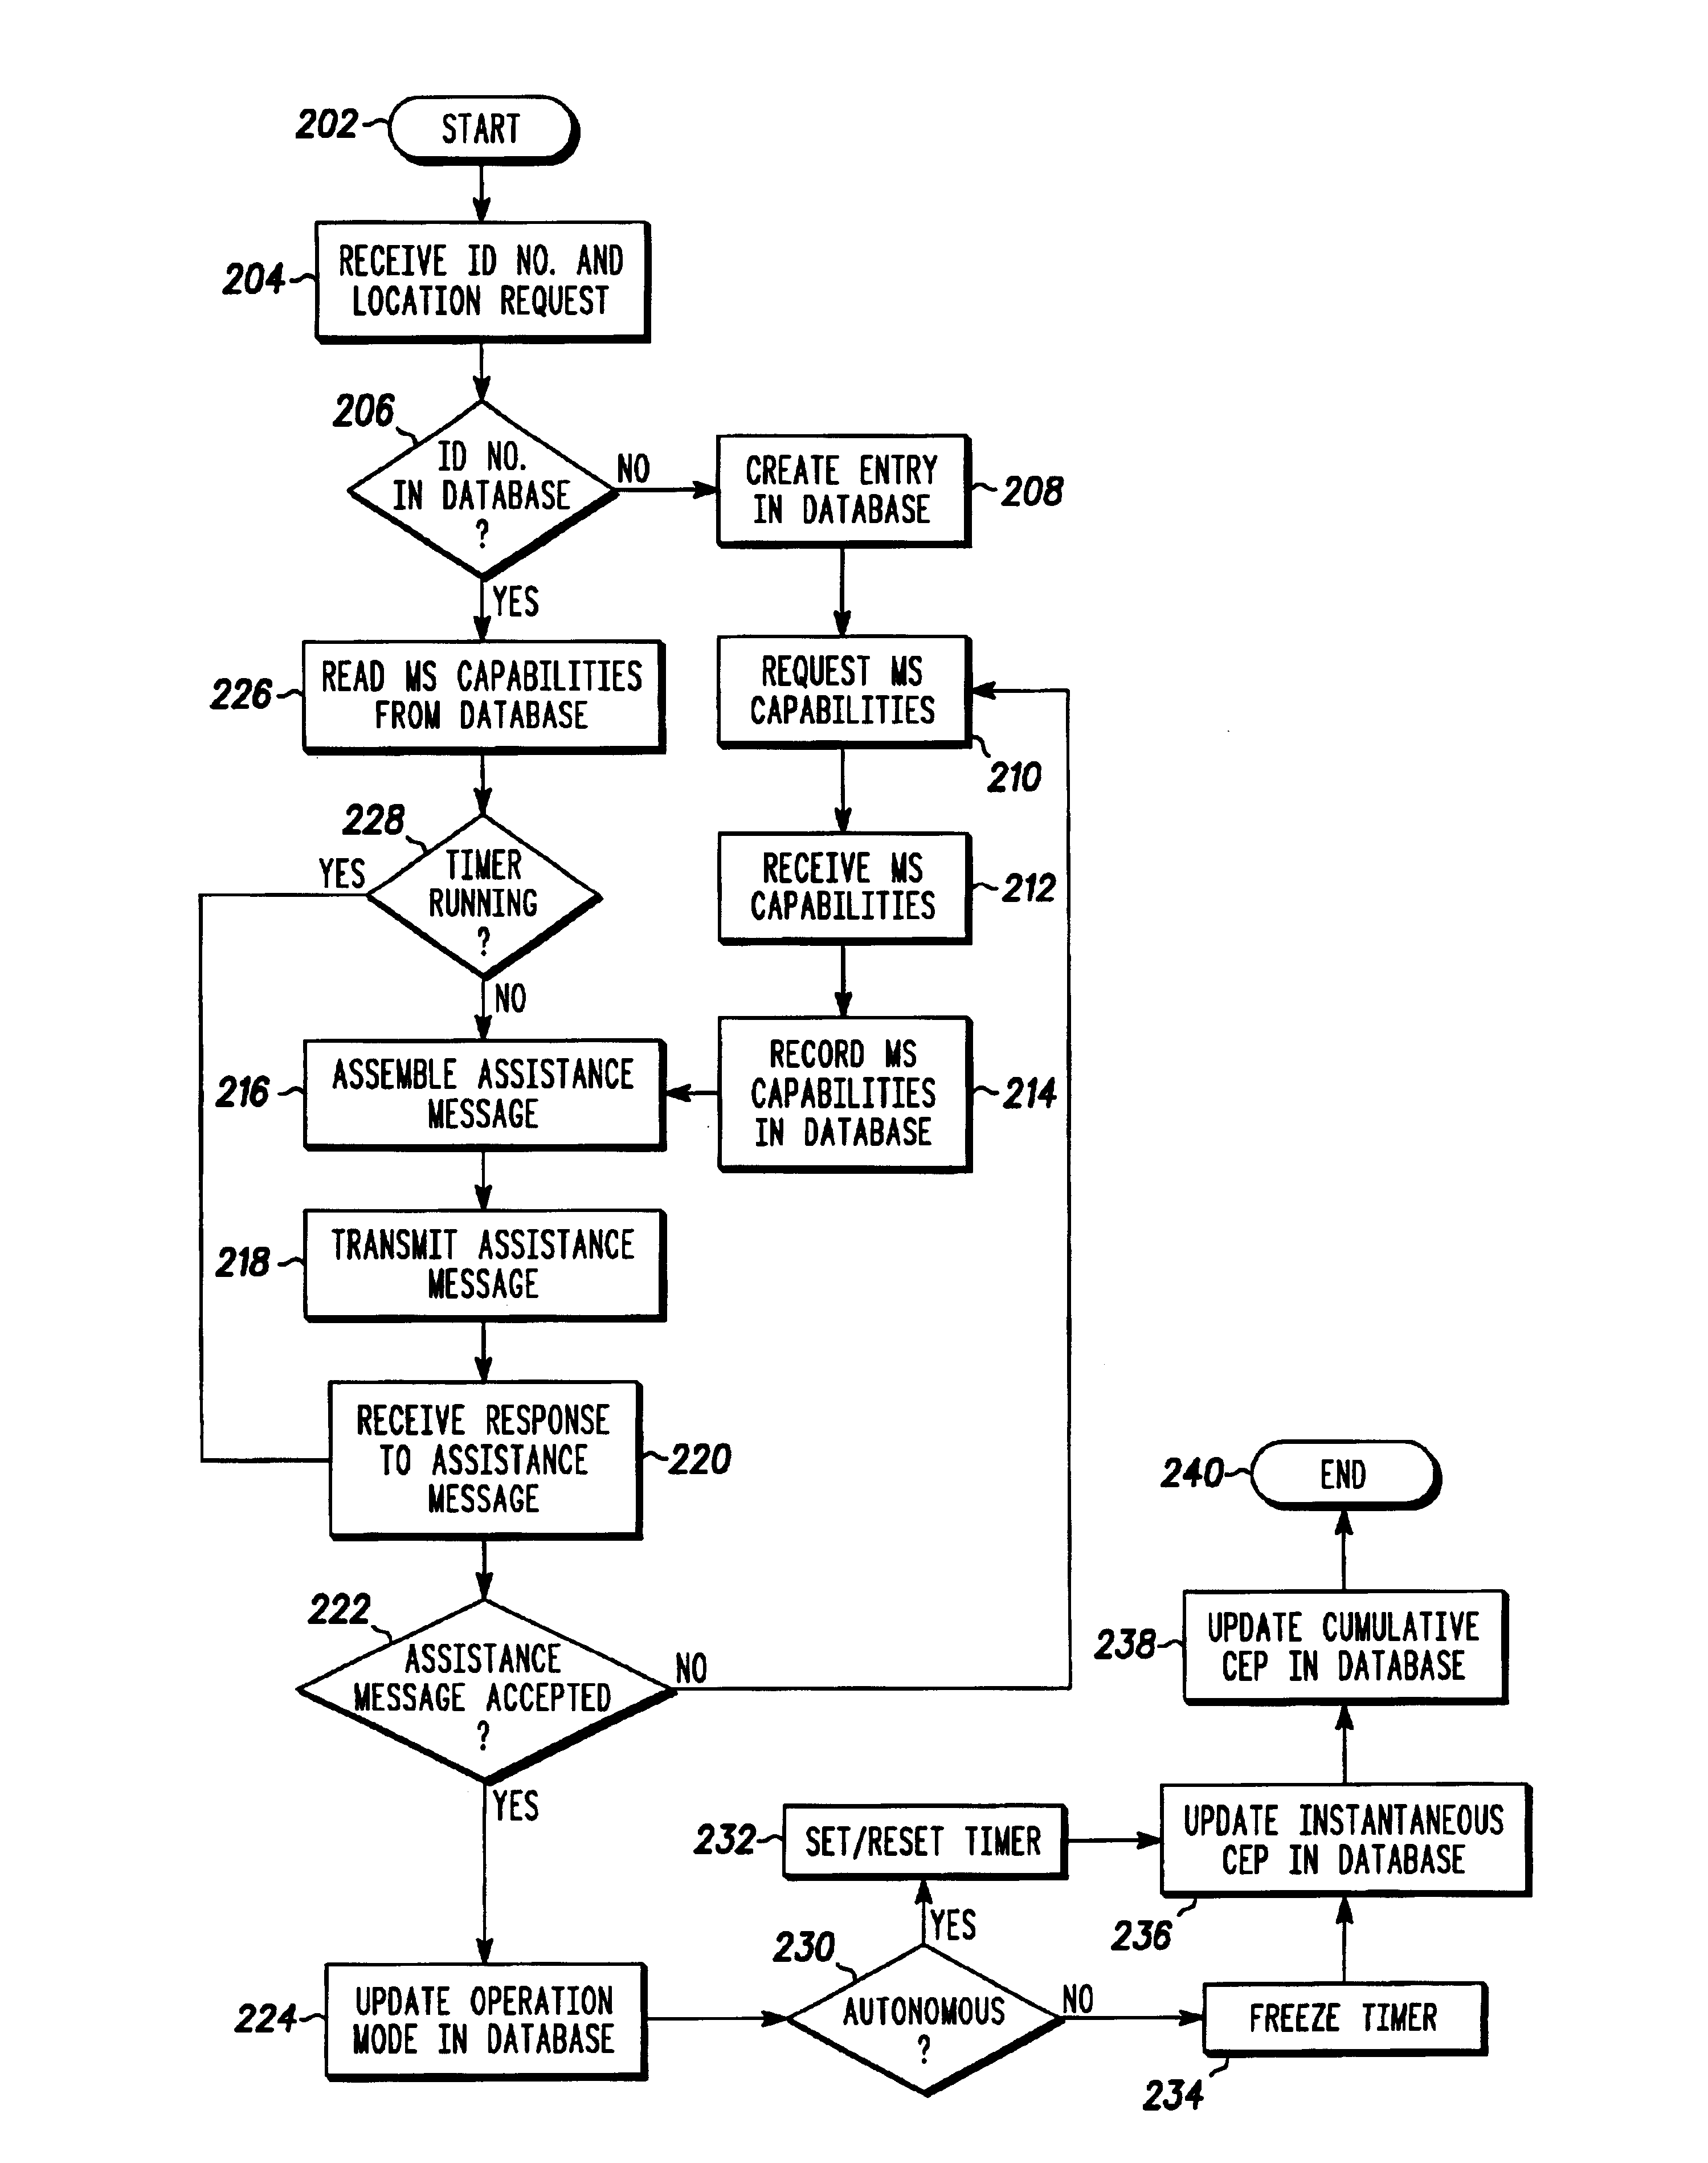 Network and method for monitoring location capabilities of a mobile station